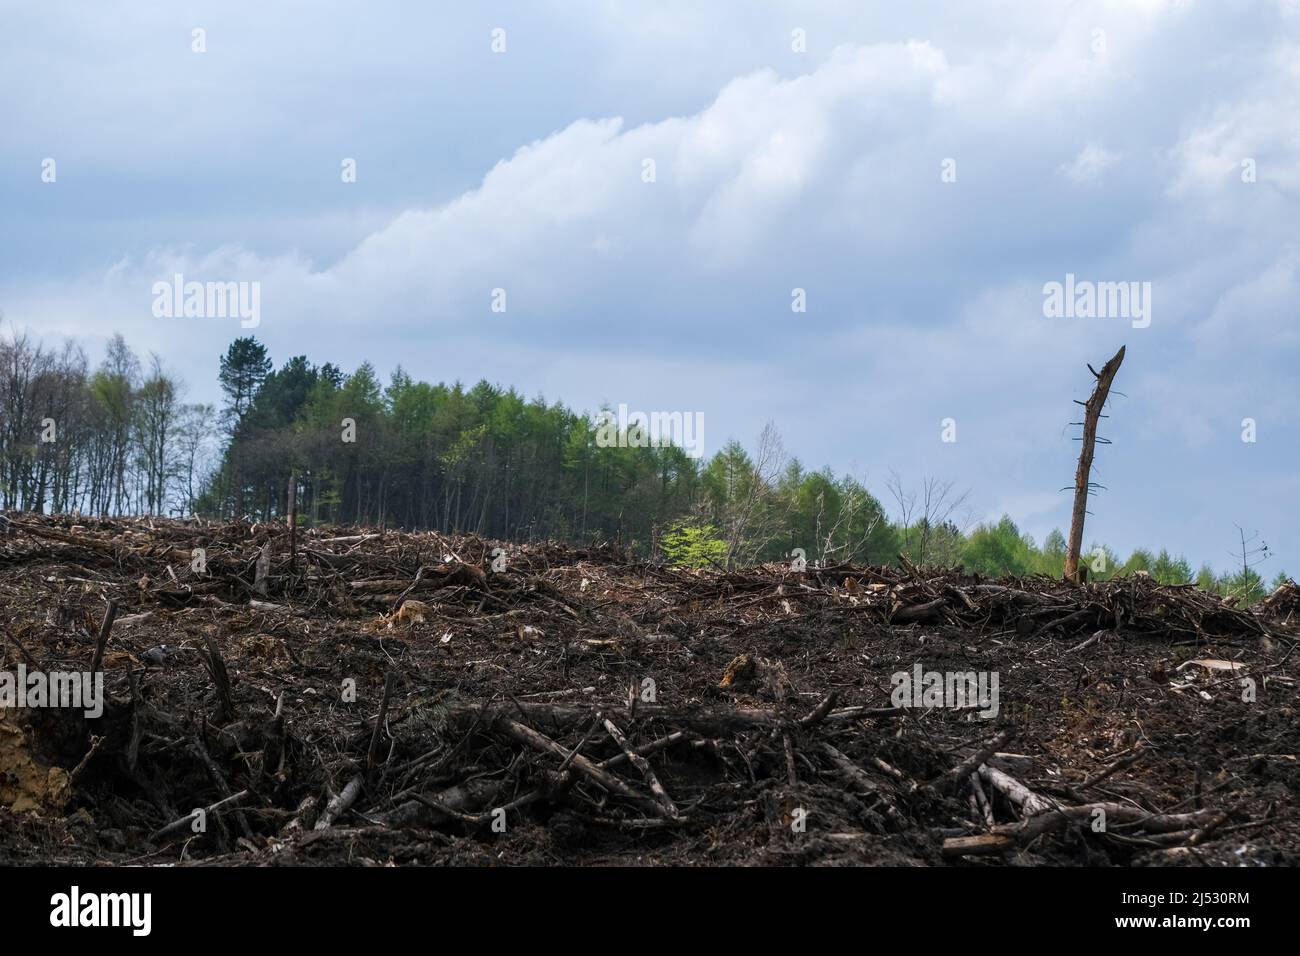 Rough Standhills Wood in Whirlow which has been devastated by forestry work Stock Photo